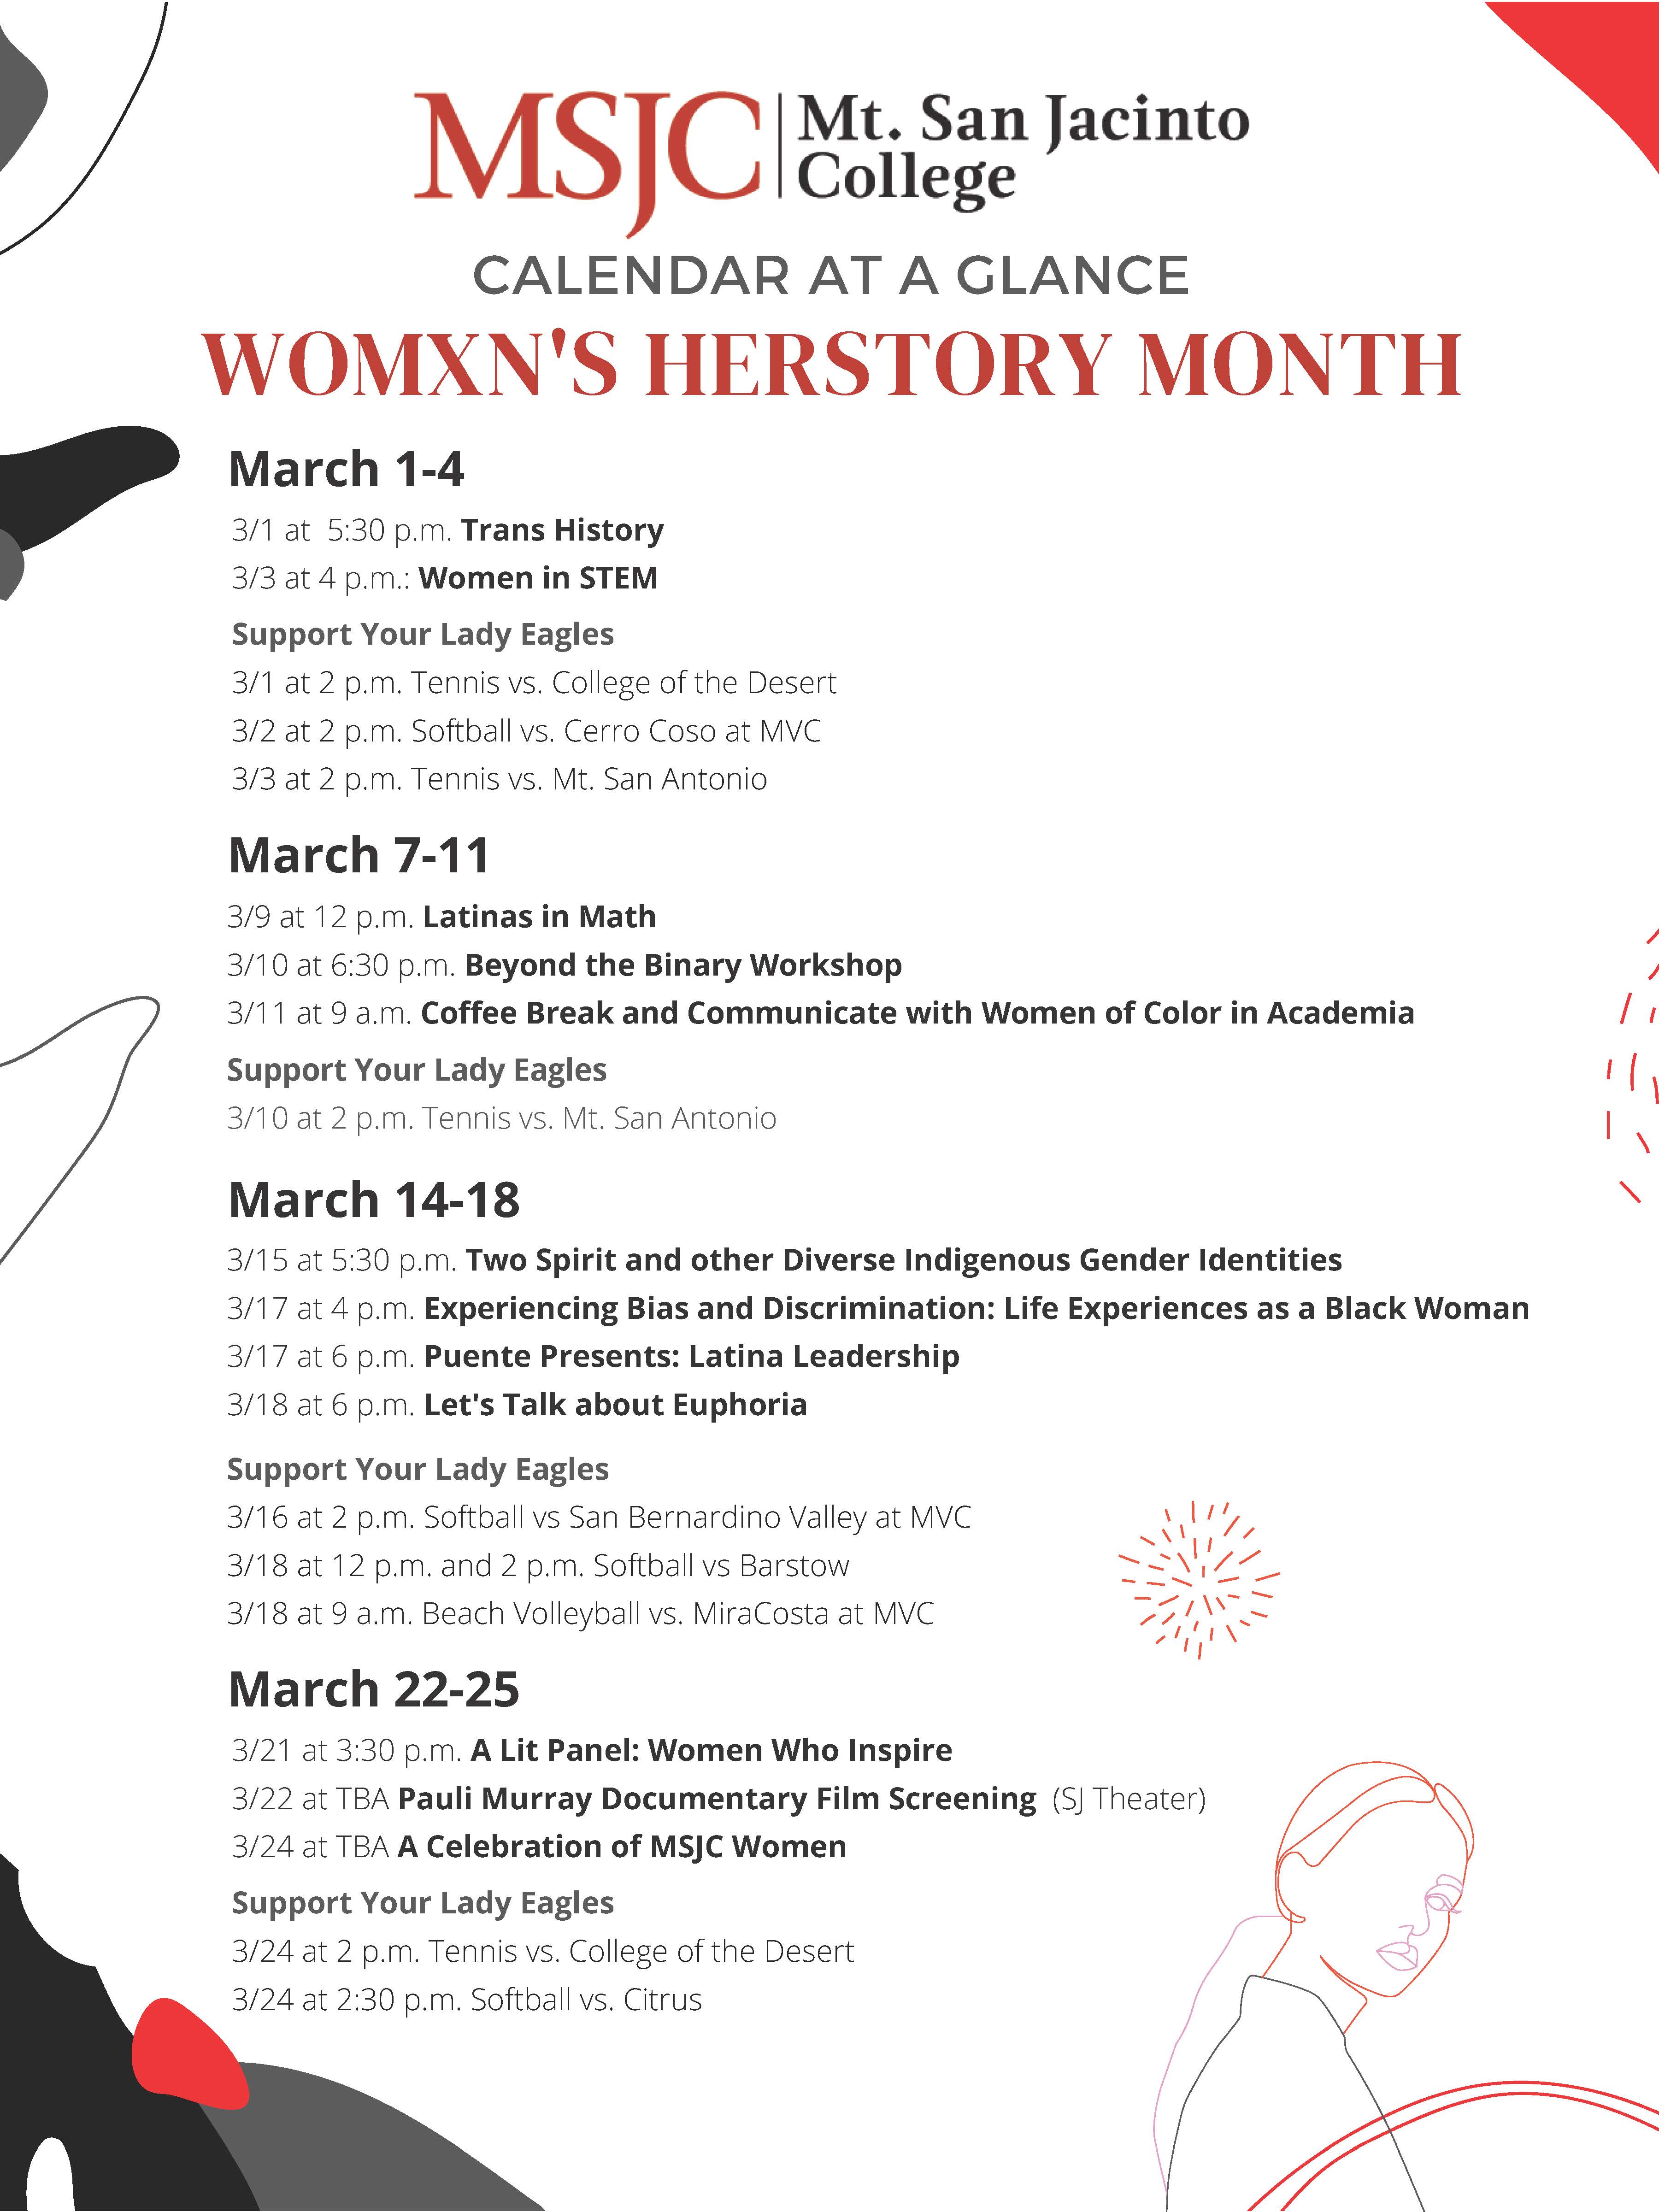 Women's Herstory Month events 2022